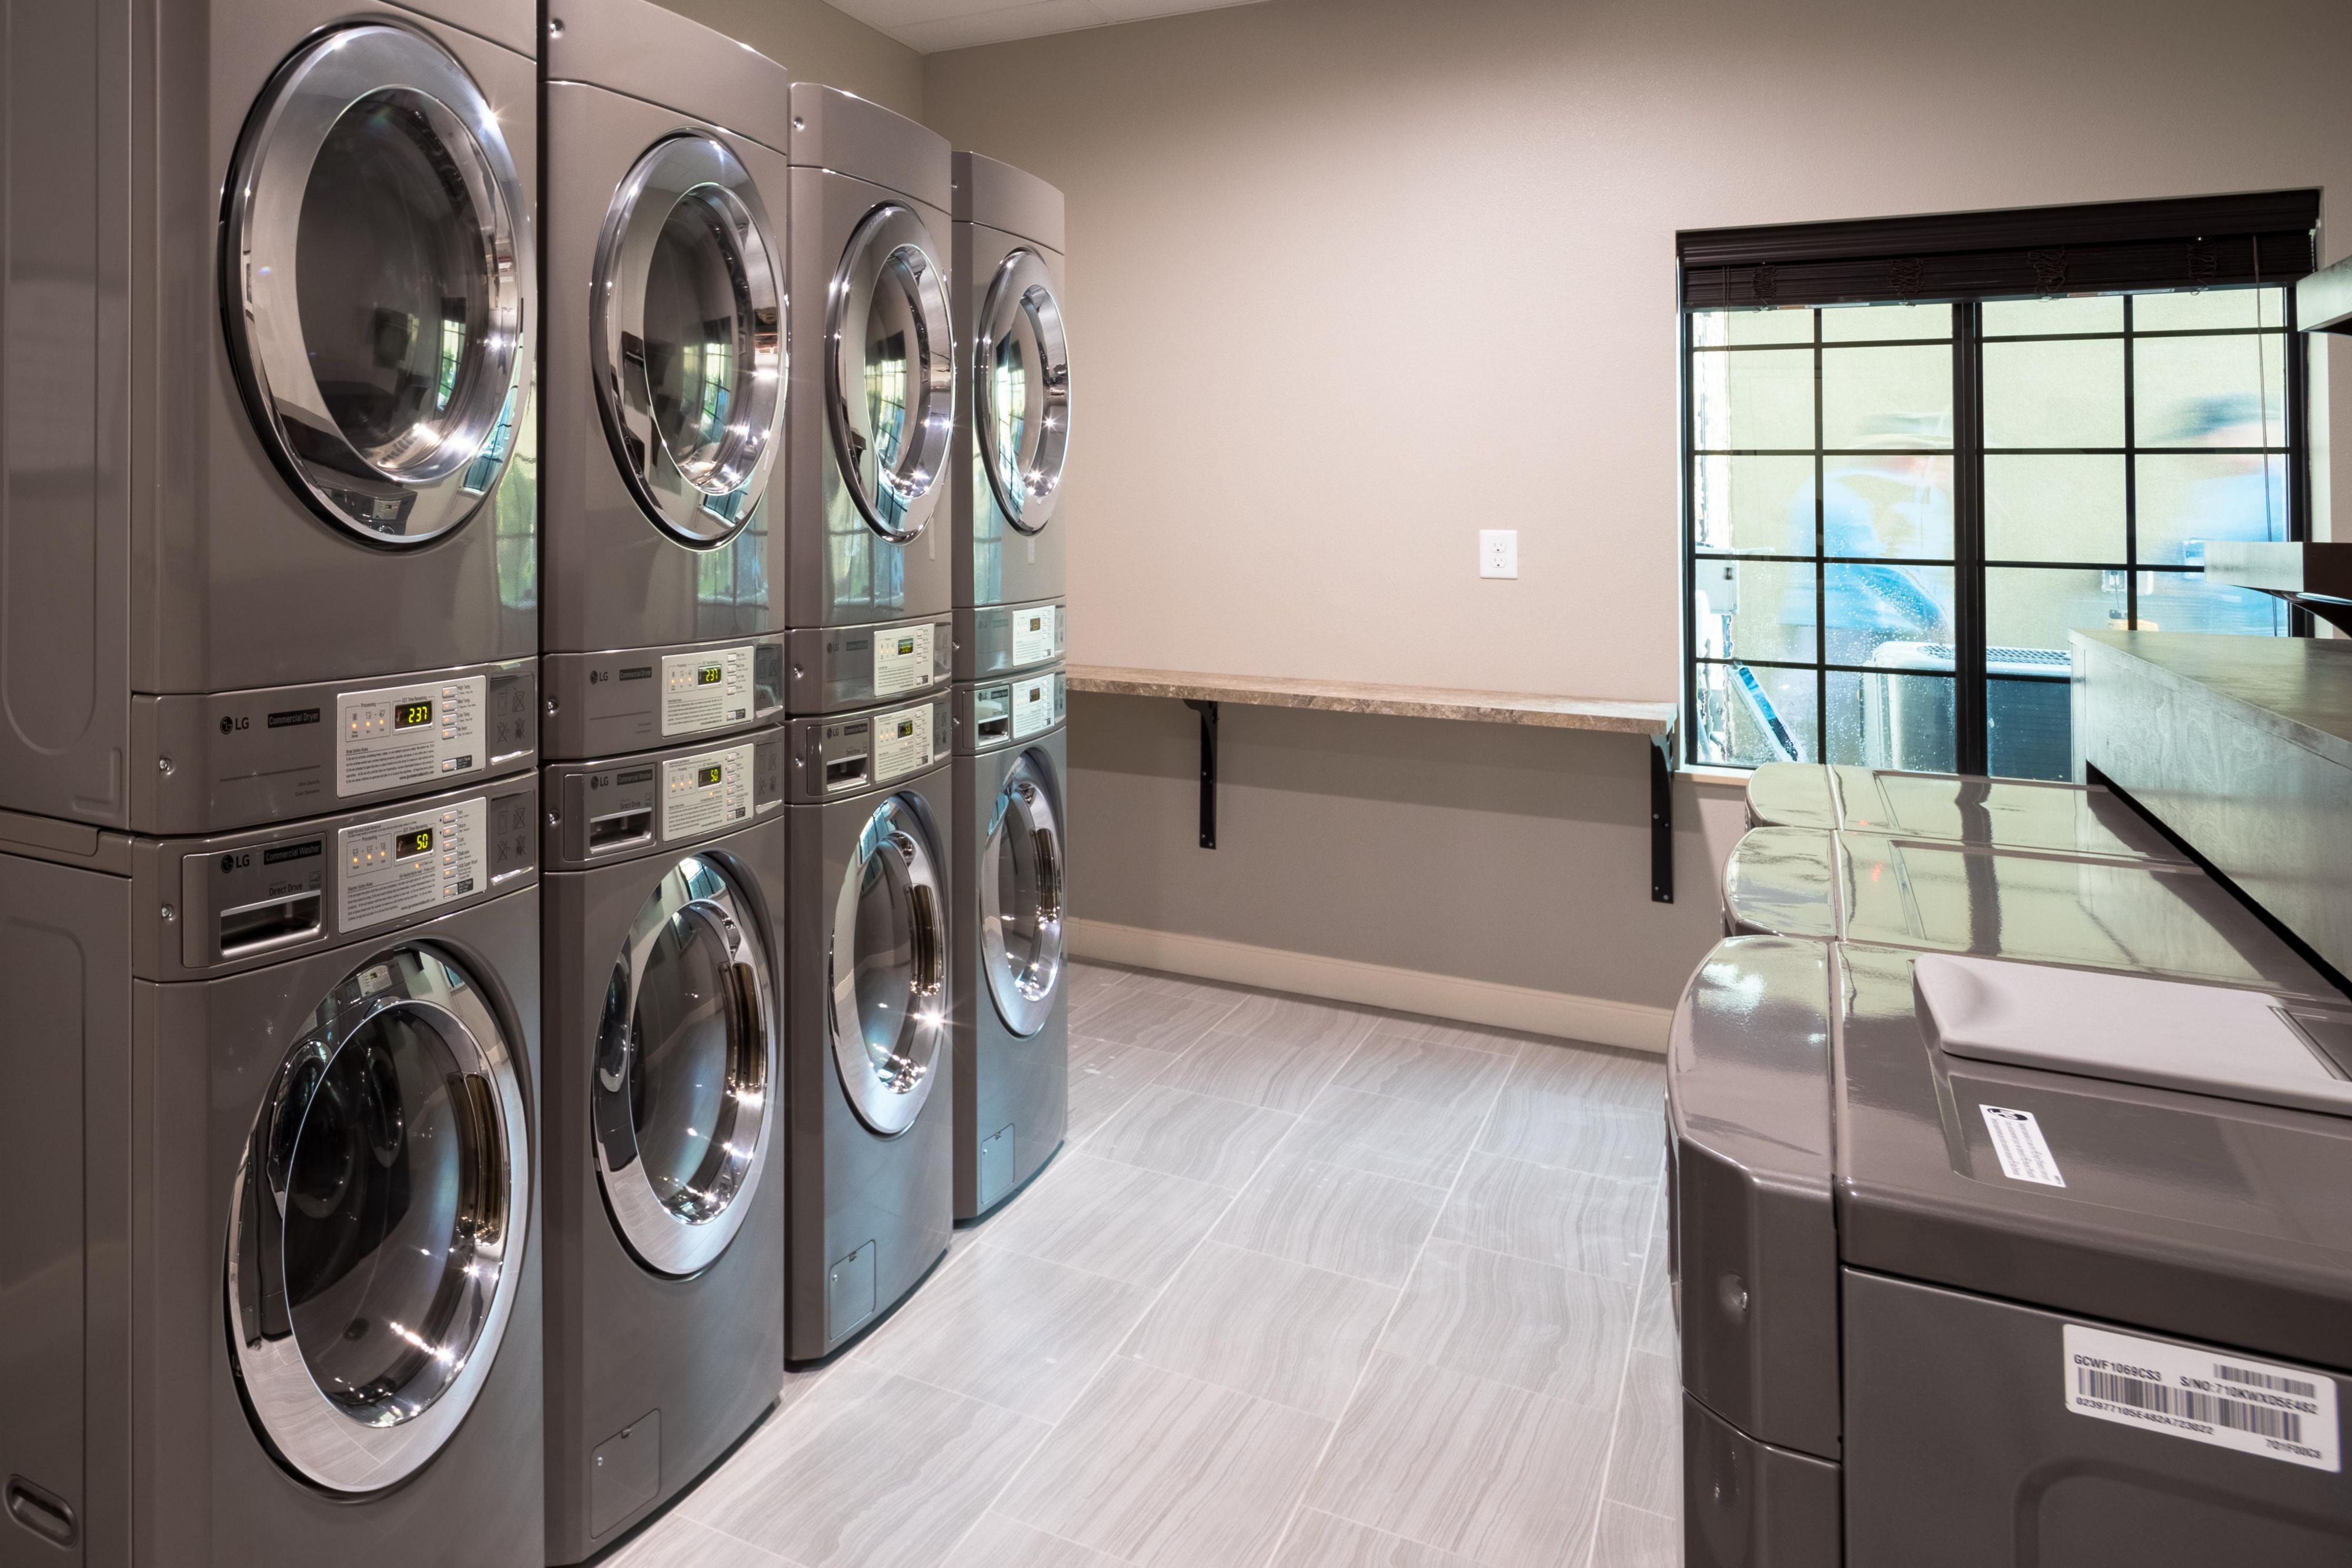 Free 24/7 COMPLIMENTARY on-site Guest self–laundry facility. We offer Dry Cleaning Pickup/Laundry same day services. Light cleaning daily.